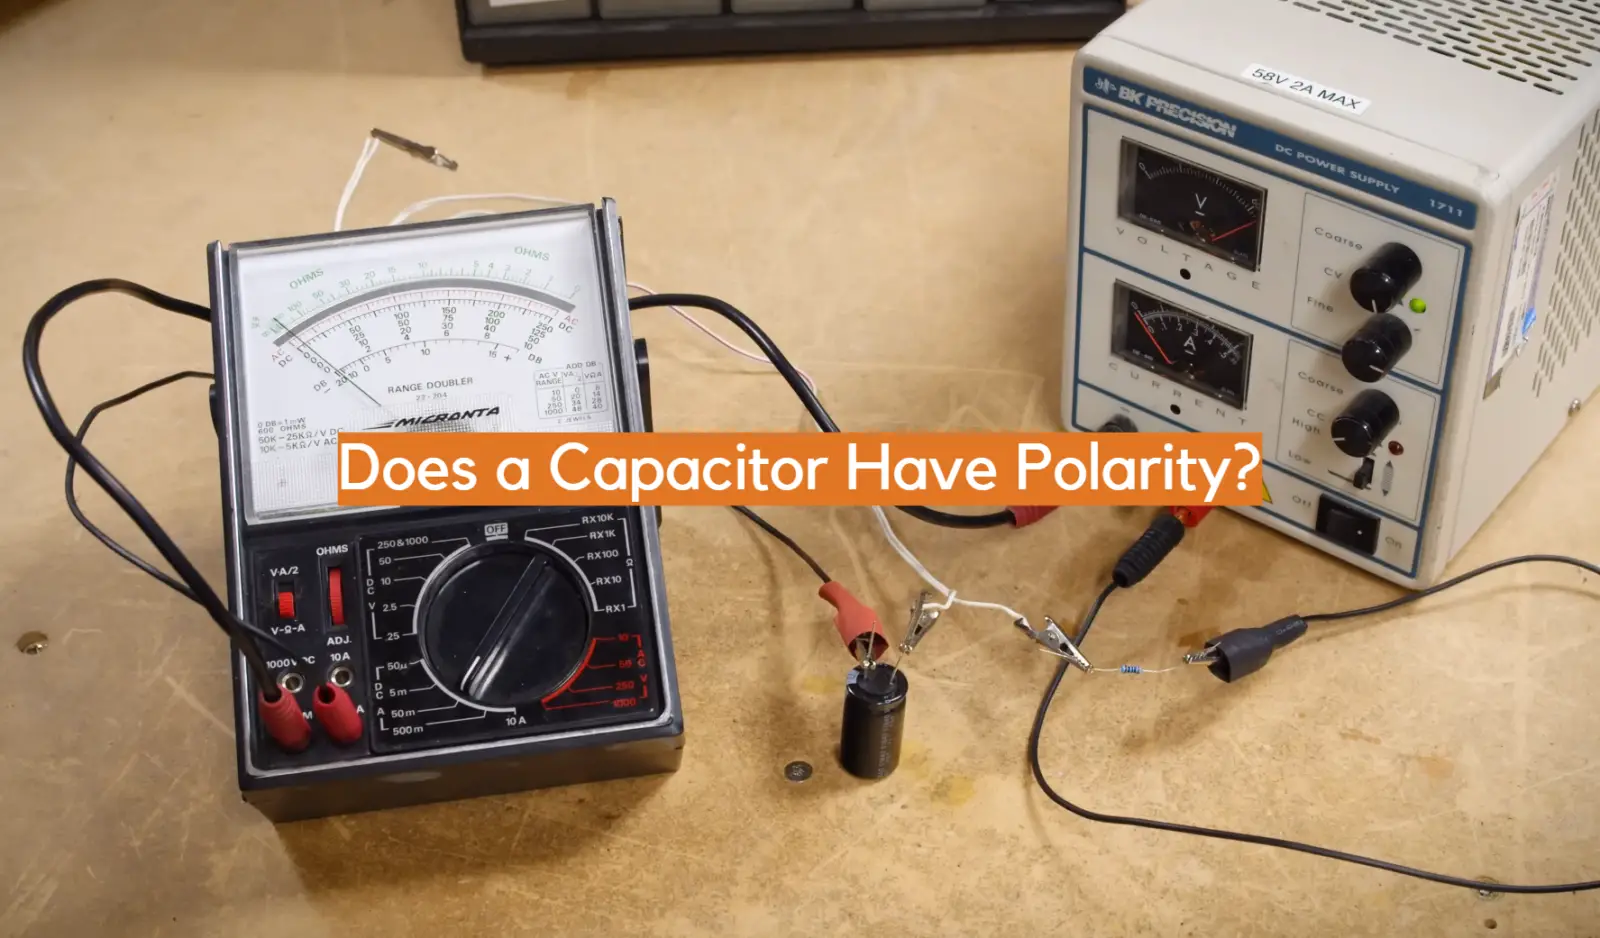 Does a Capacitor Have Polarity?